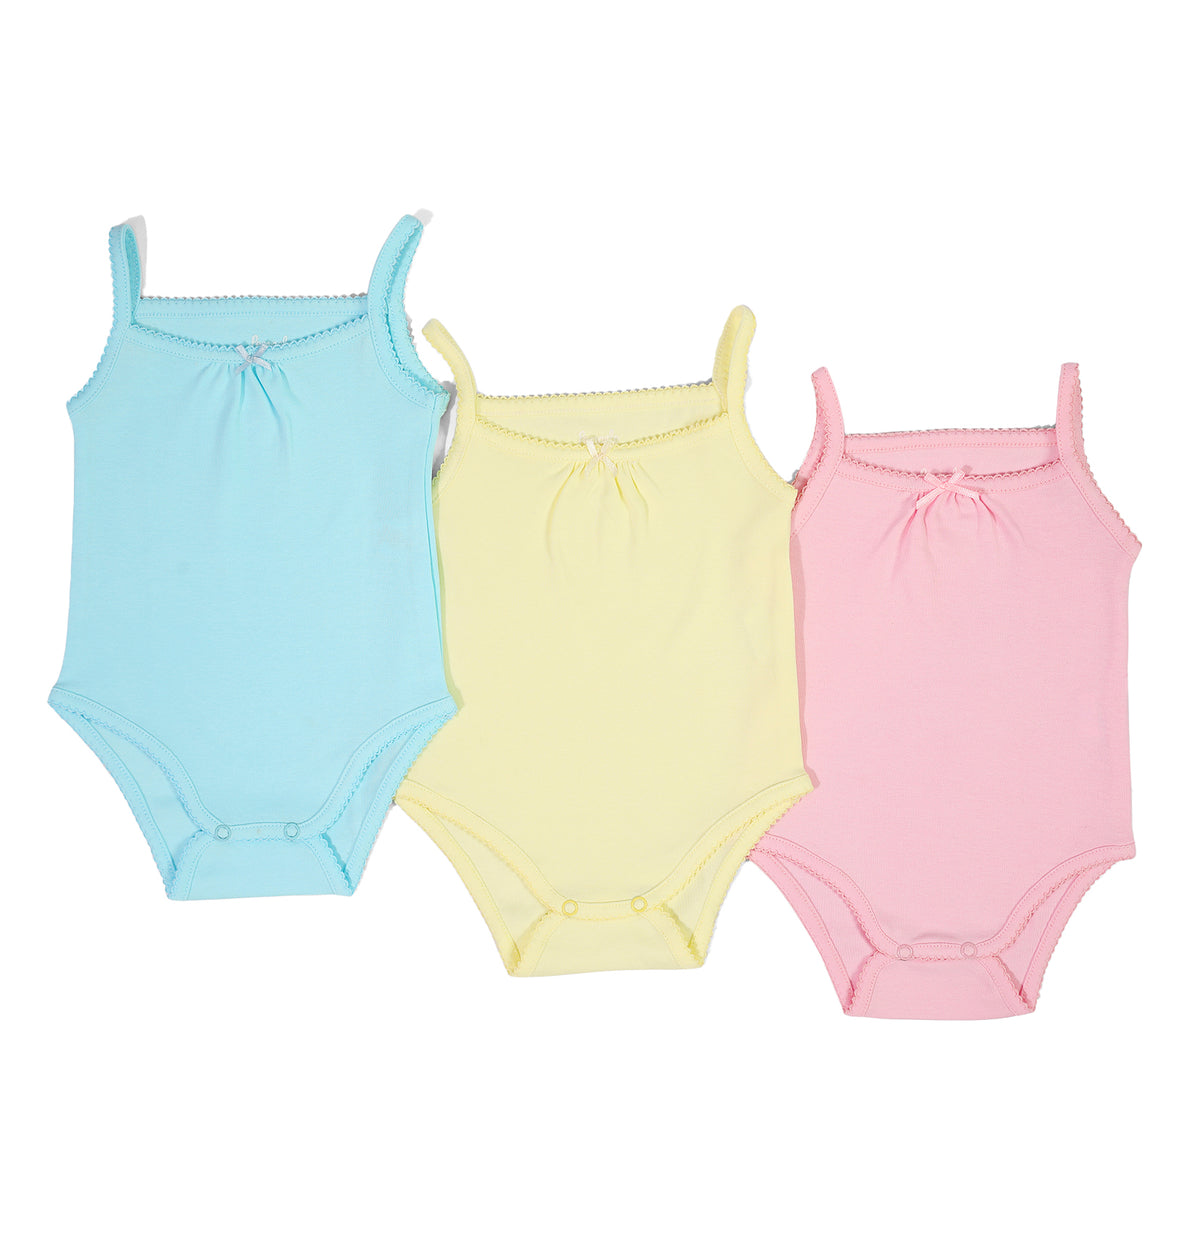 Plain colorful sleeveless baby girl set of 3 overalls by pompelo